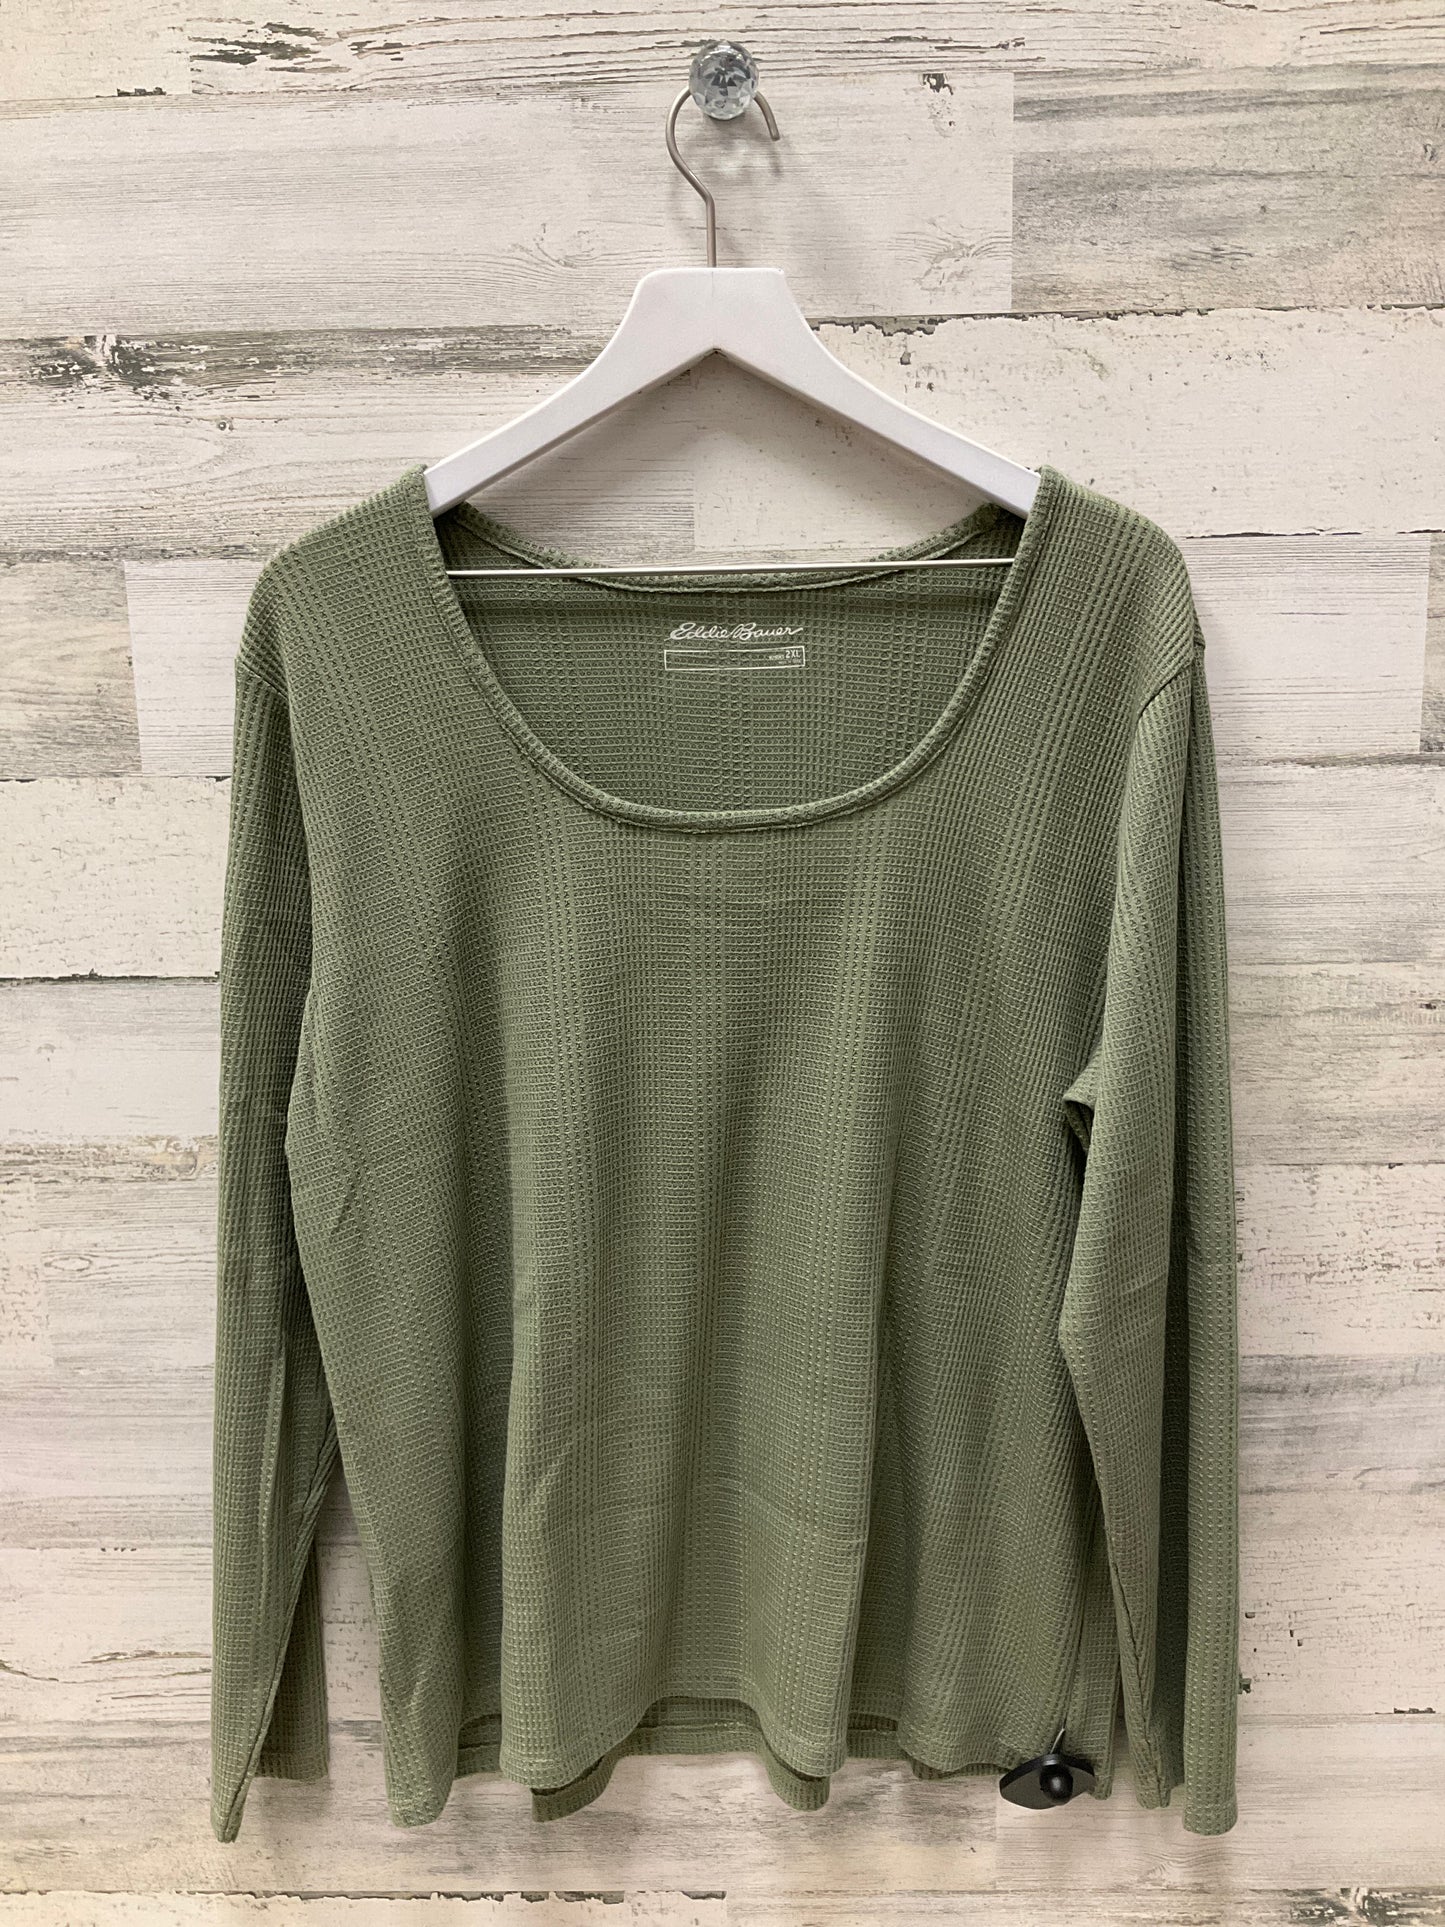 Top Long Sleeve By Eddie Bauer  Size: 2x